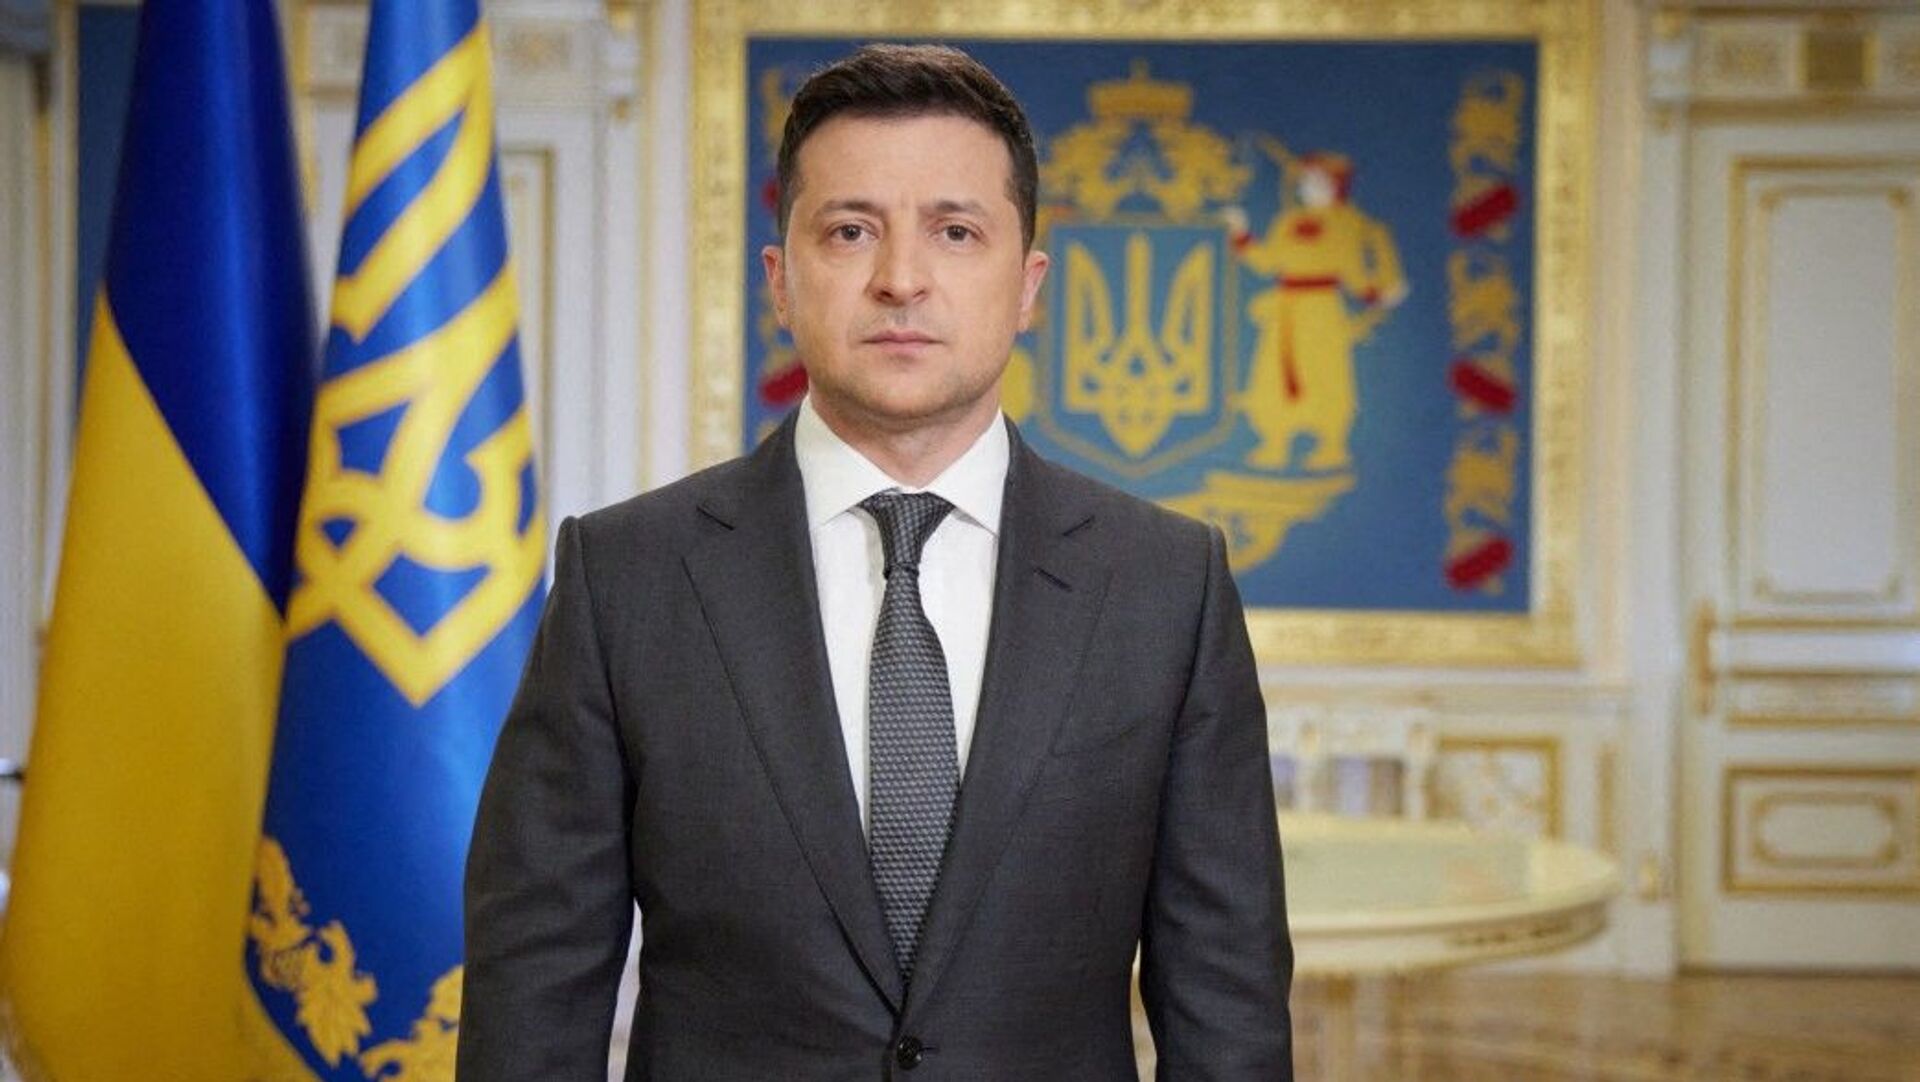 This handout photograph taken and released by The Ukrainian Presidential Press Service on April 20, 2021, shows Ukranian President Volodymyr Zelensky speaking during his late evening address in Kiev.  - Sputnik International, 1920, 08.03.2022